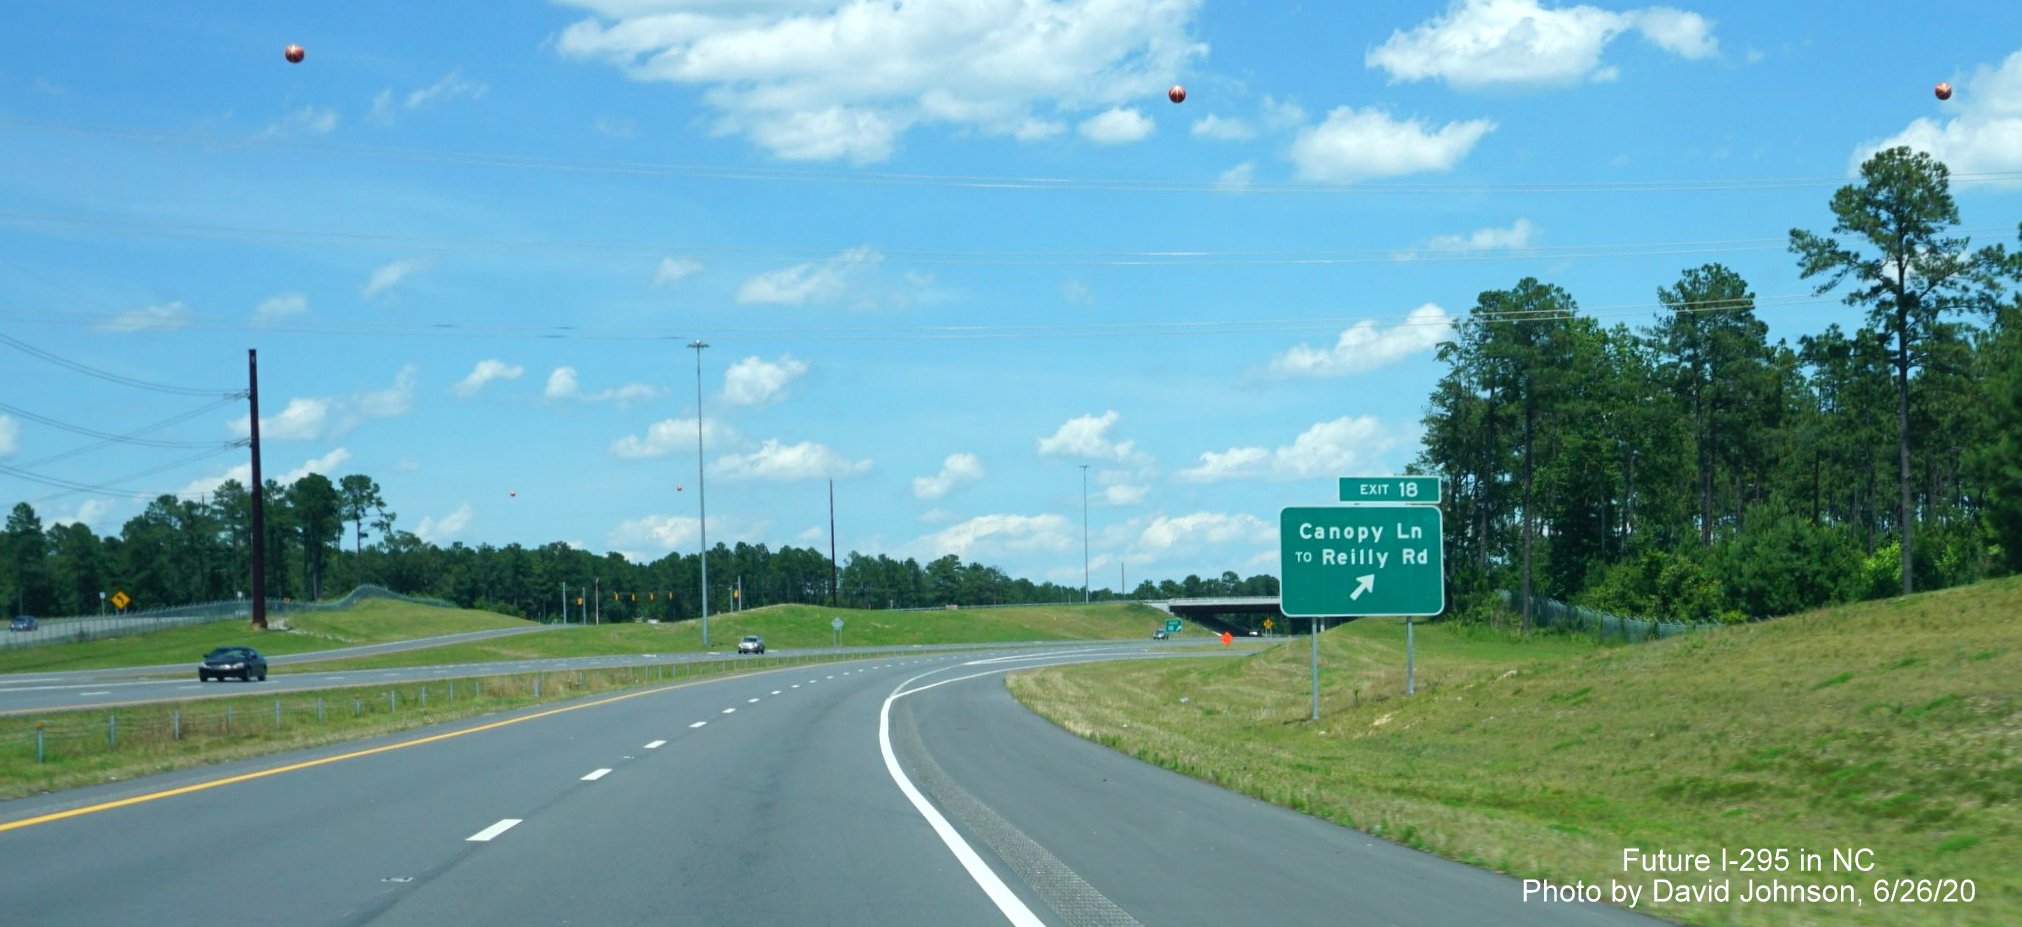 Image of Canopy Lane exit sign on NC 295(Future I-295) North in Fort Bragg, by David Johnson June 2020